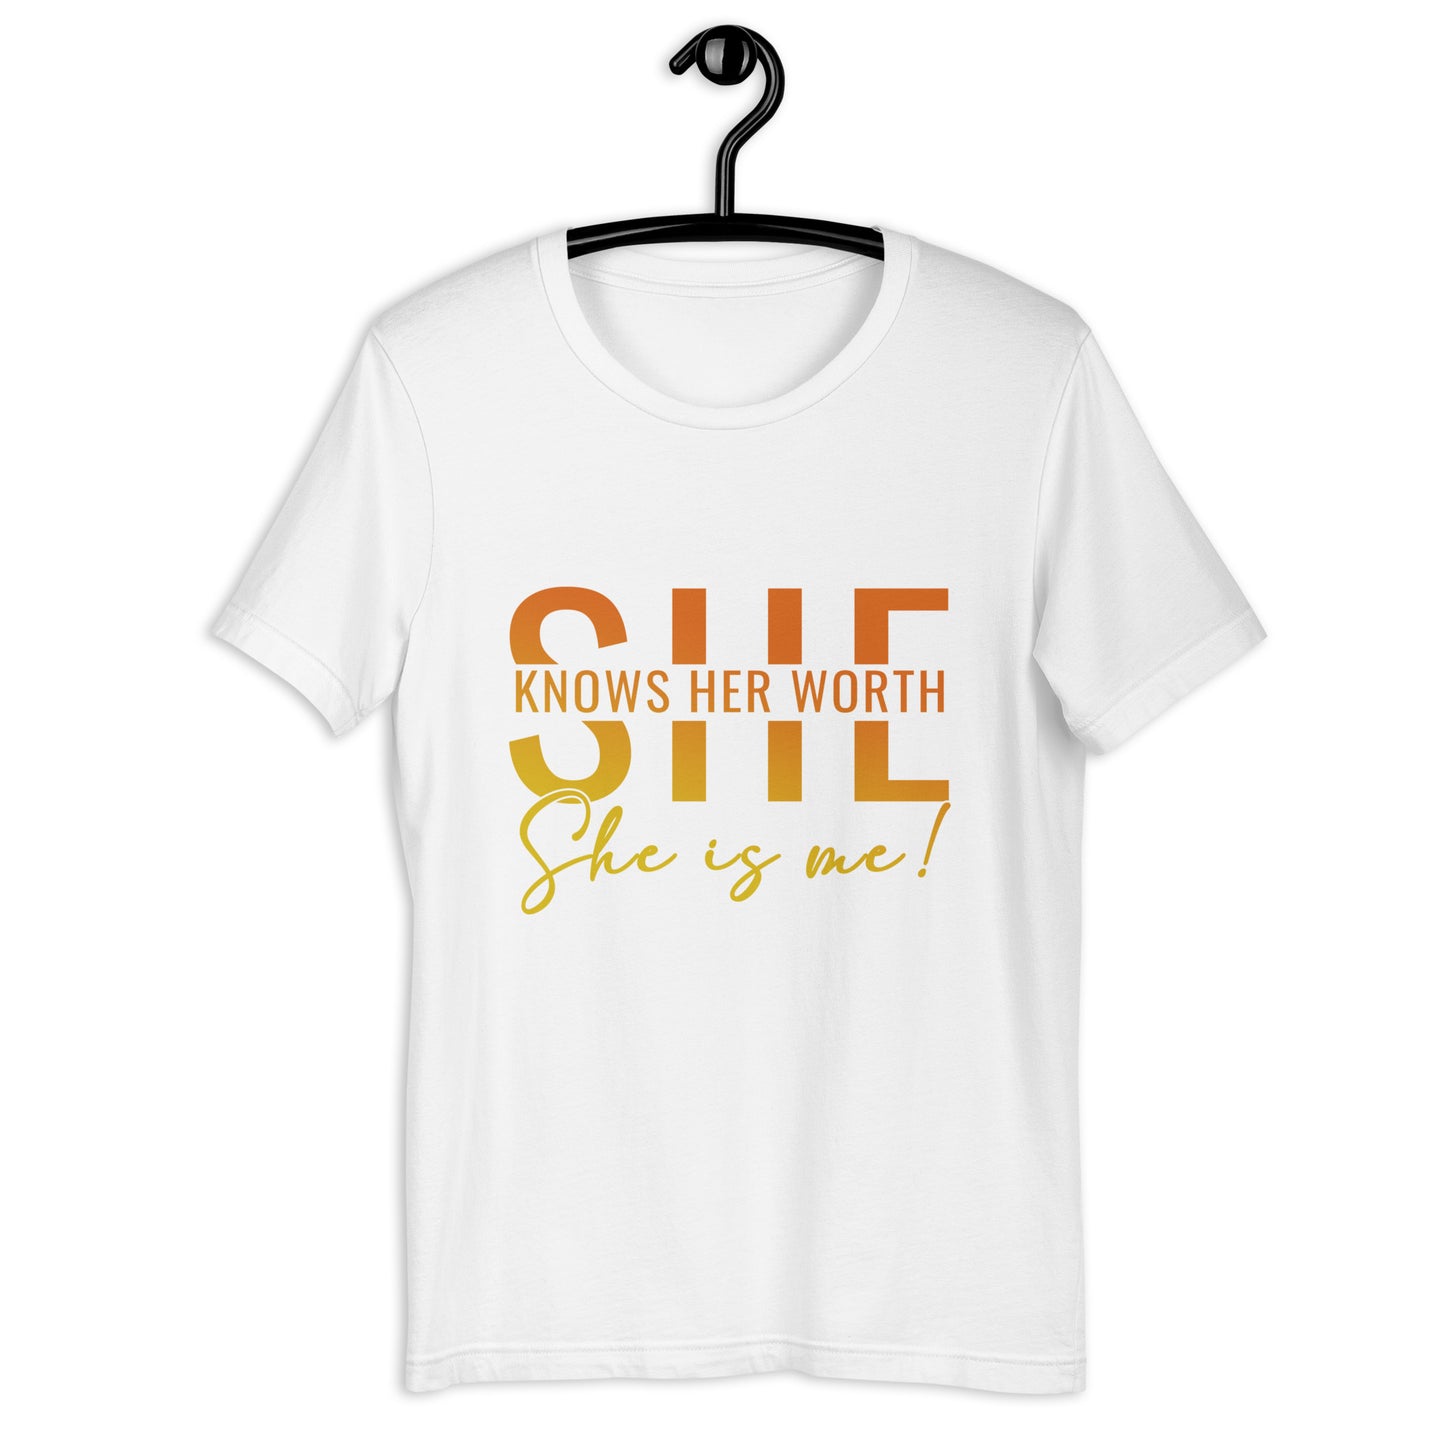 She Knows Her Worth  t-shirt